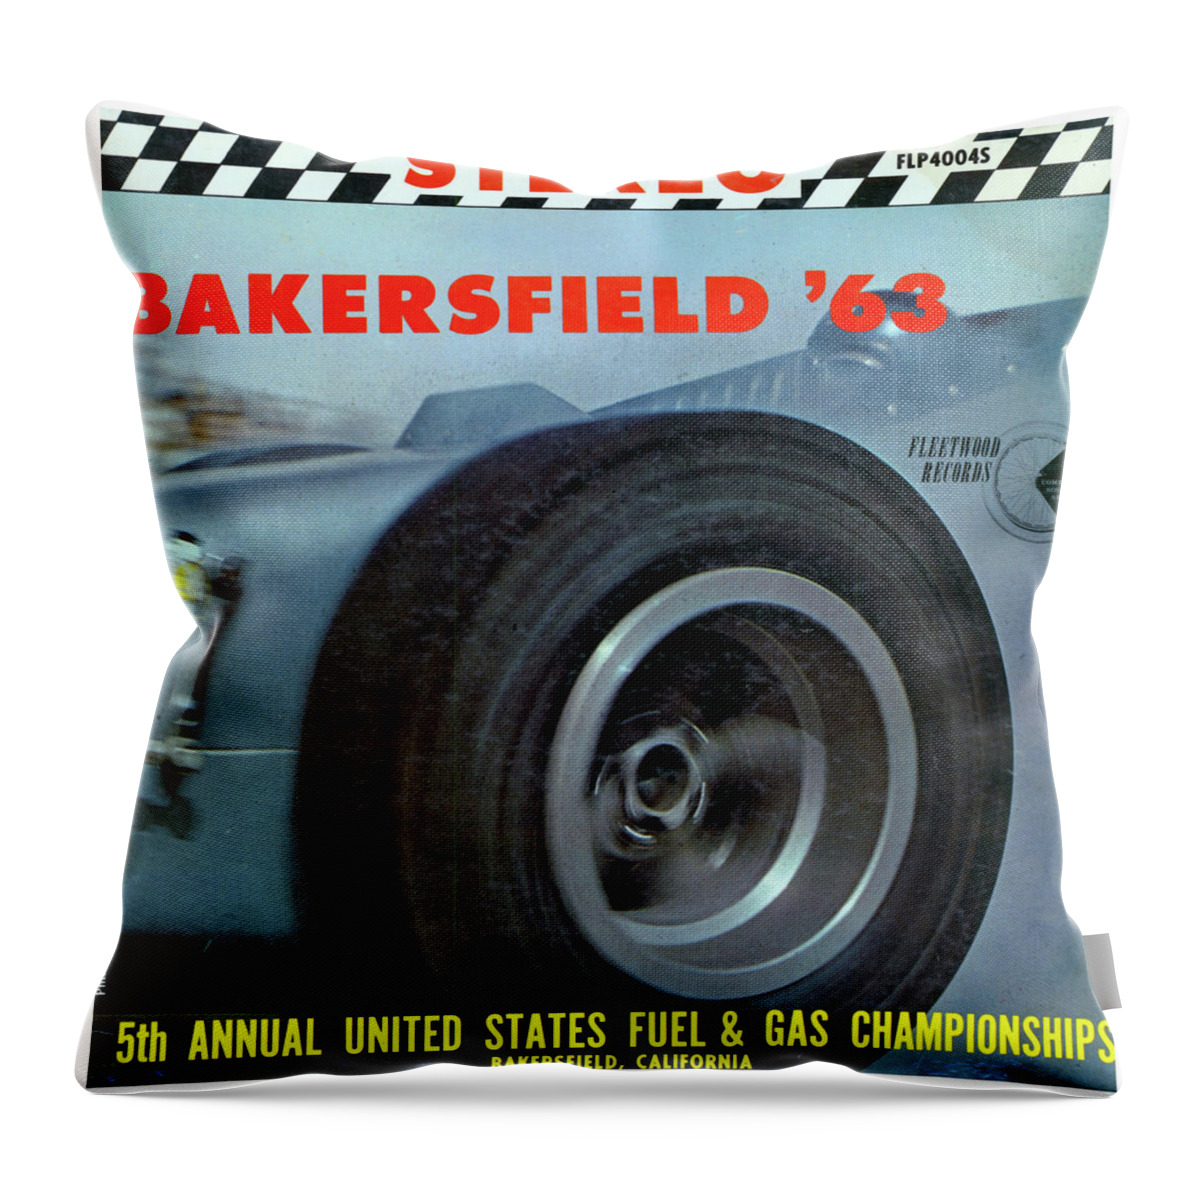 Bakersfield Throw Pillow featuring the photograph Bakersfiled '63 Album Cover by Retrographs